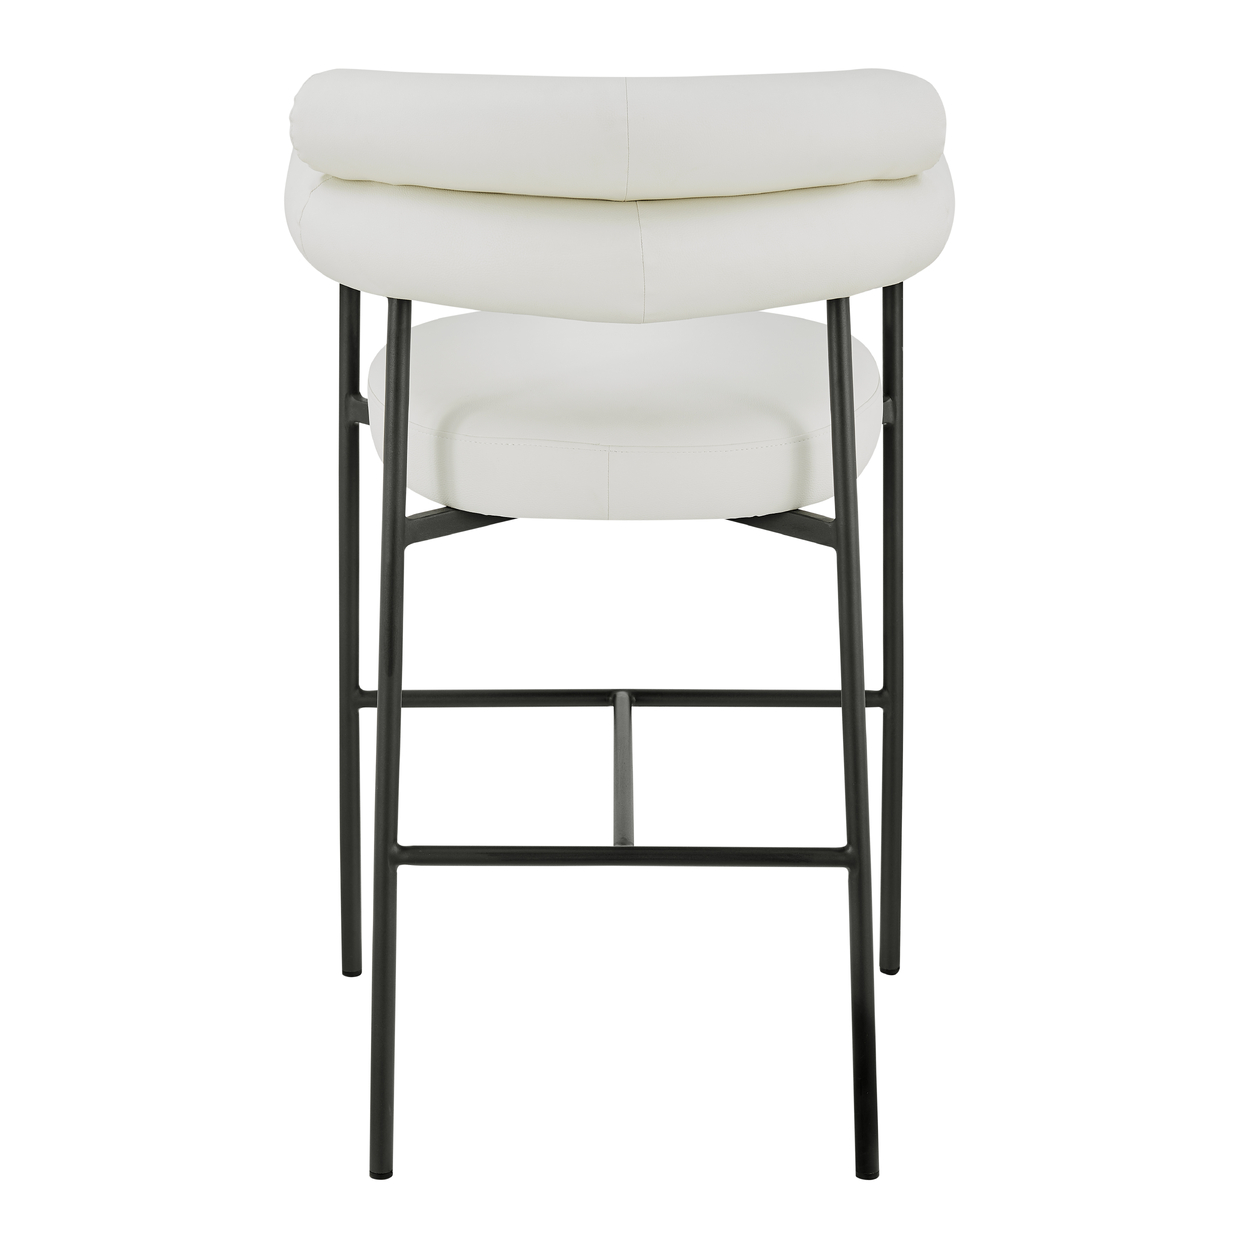 Iconic Home Ferro Bar Stool Chair Faux Leather Upholstered Round Seat Open Back Design Architectural Solid Metal Frame - Cream